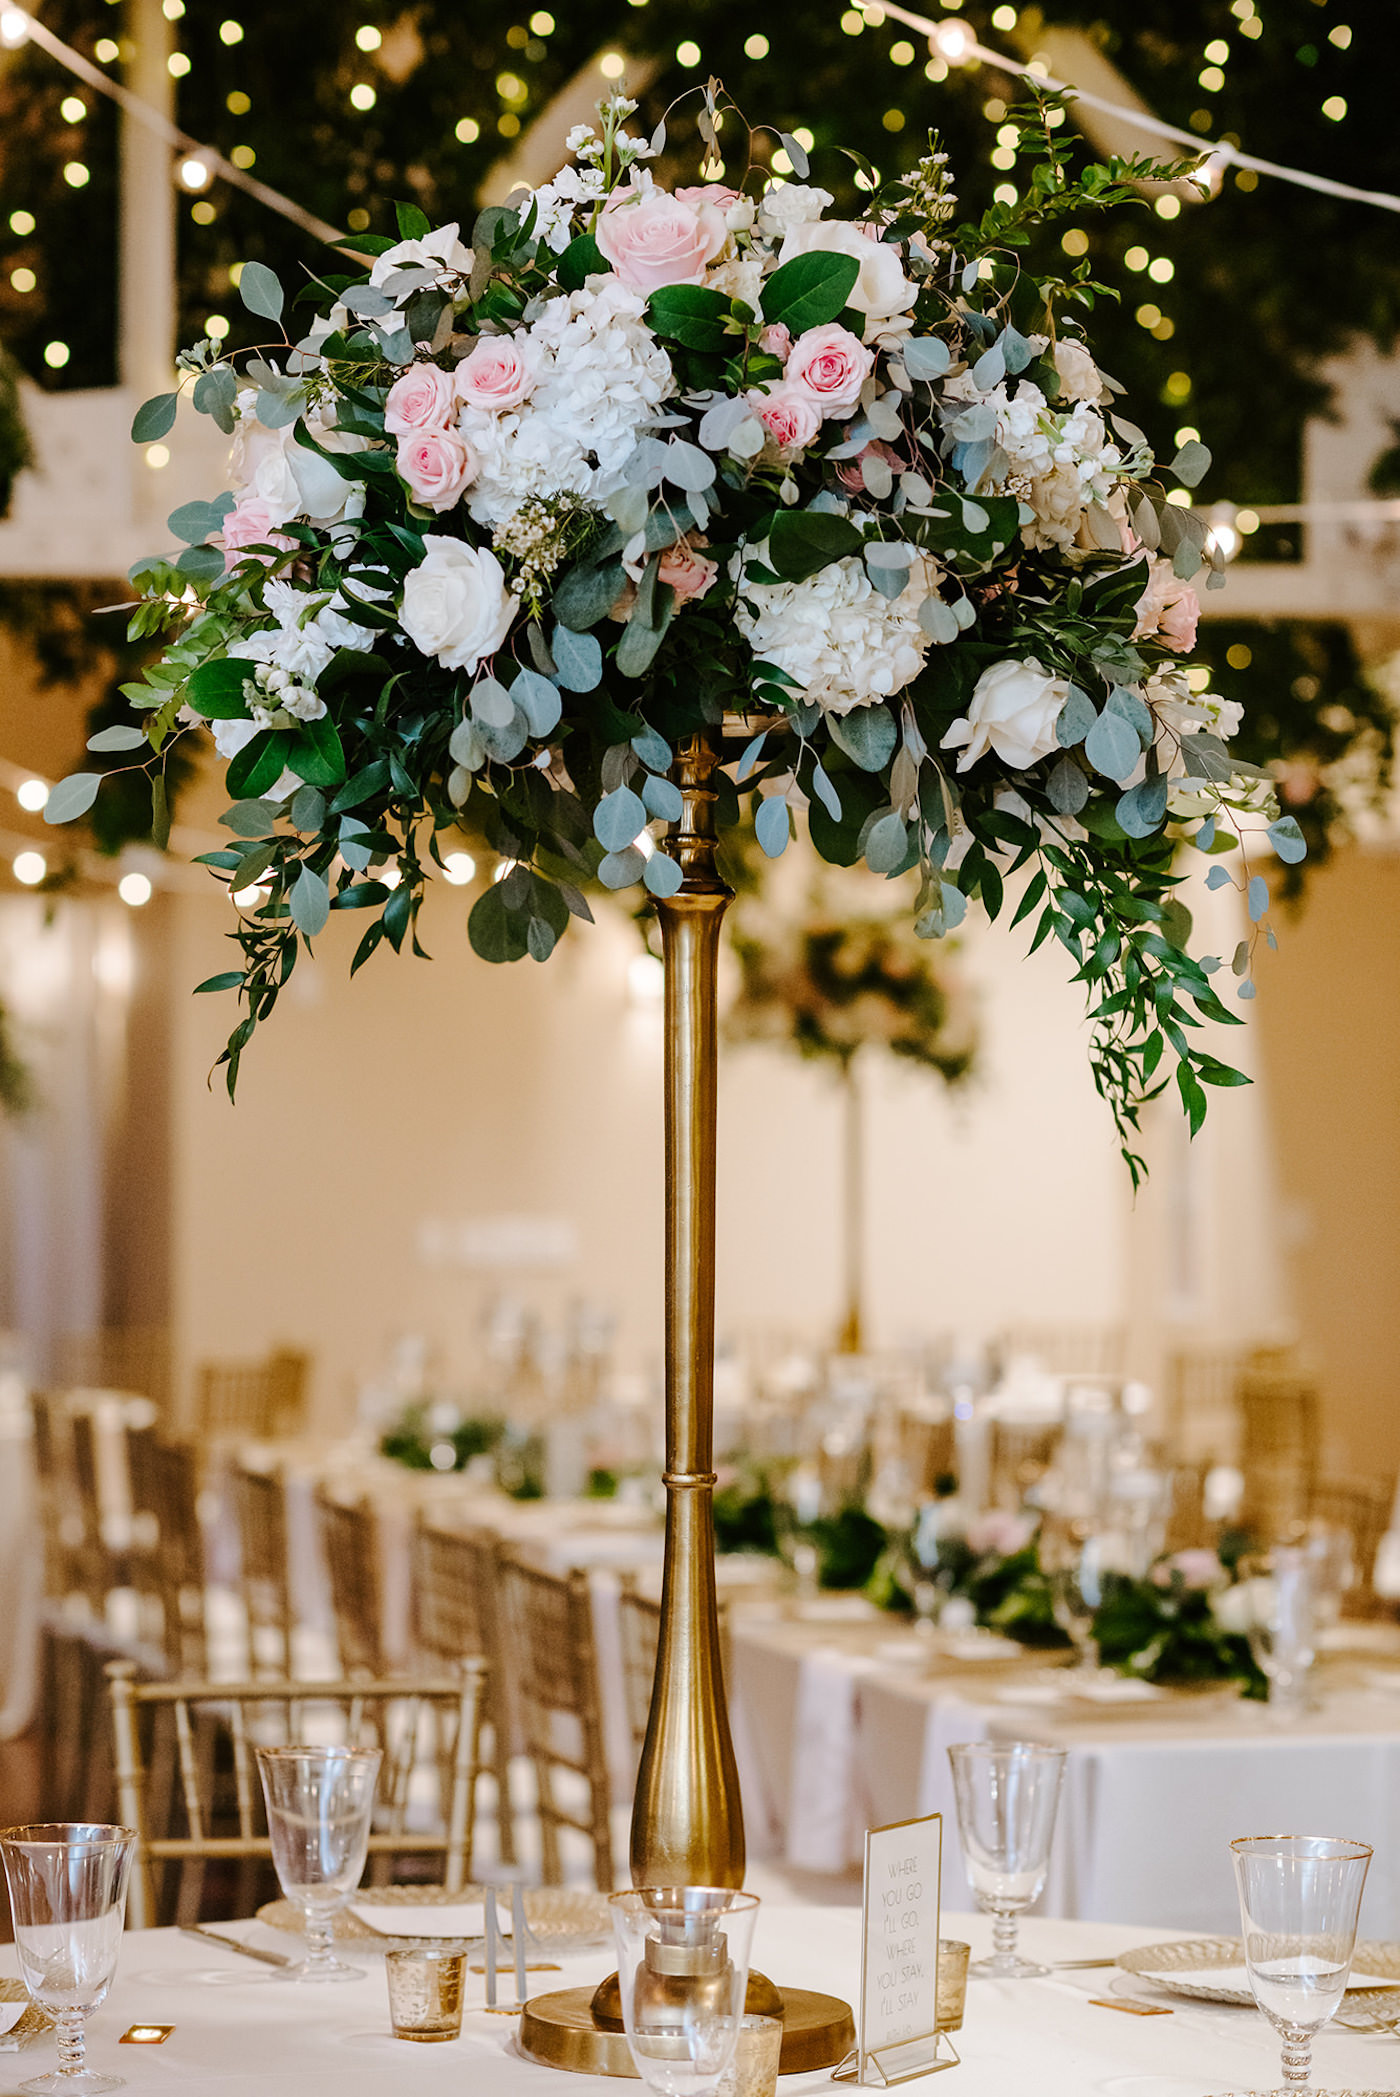 Tall Wedding Centerpiece with White Hydrangea and Blush Pink Roses and Eucalyptus Greenery on top of Gold Candlestick | Monarch Events and Design